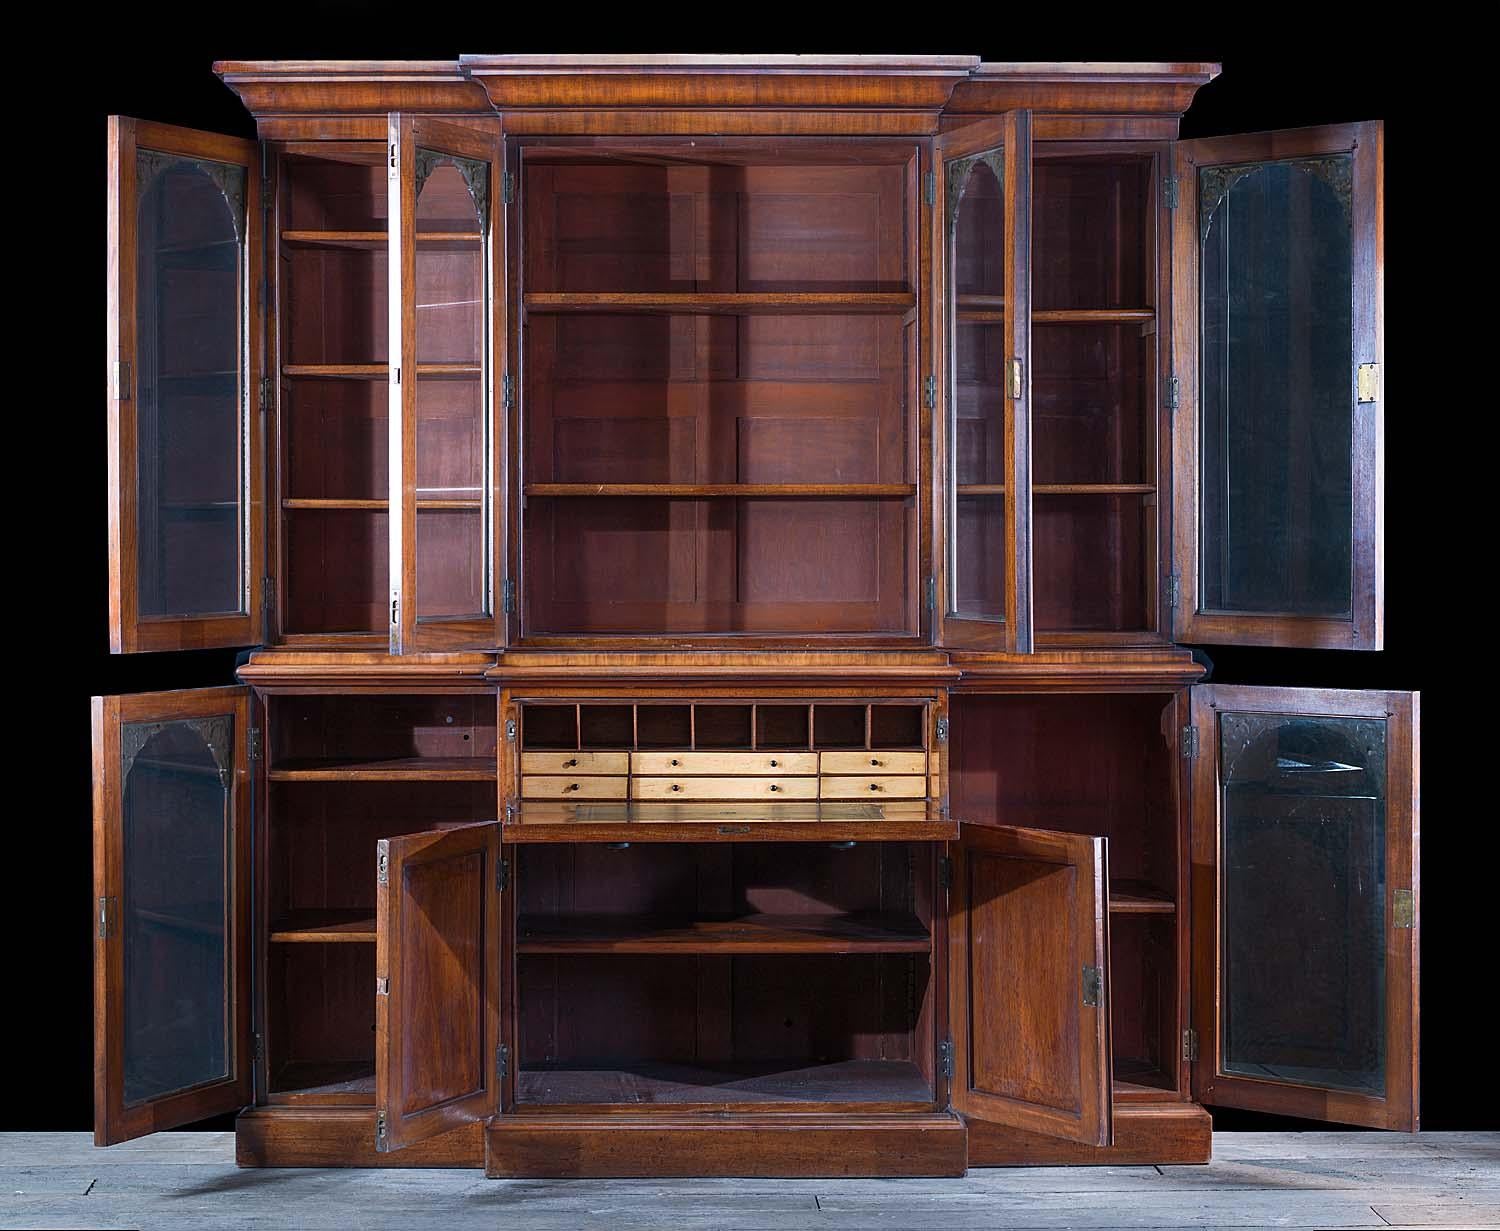 A very fine and large Victorian mahogany breakfront bookcase and secretaire. The upper part has four compartments, the doors of which are glazed with their original plate glass revealing the adjustable shelving within, the doors themselves have